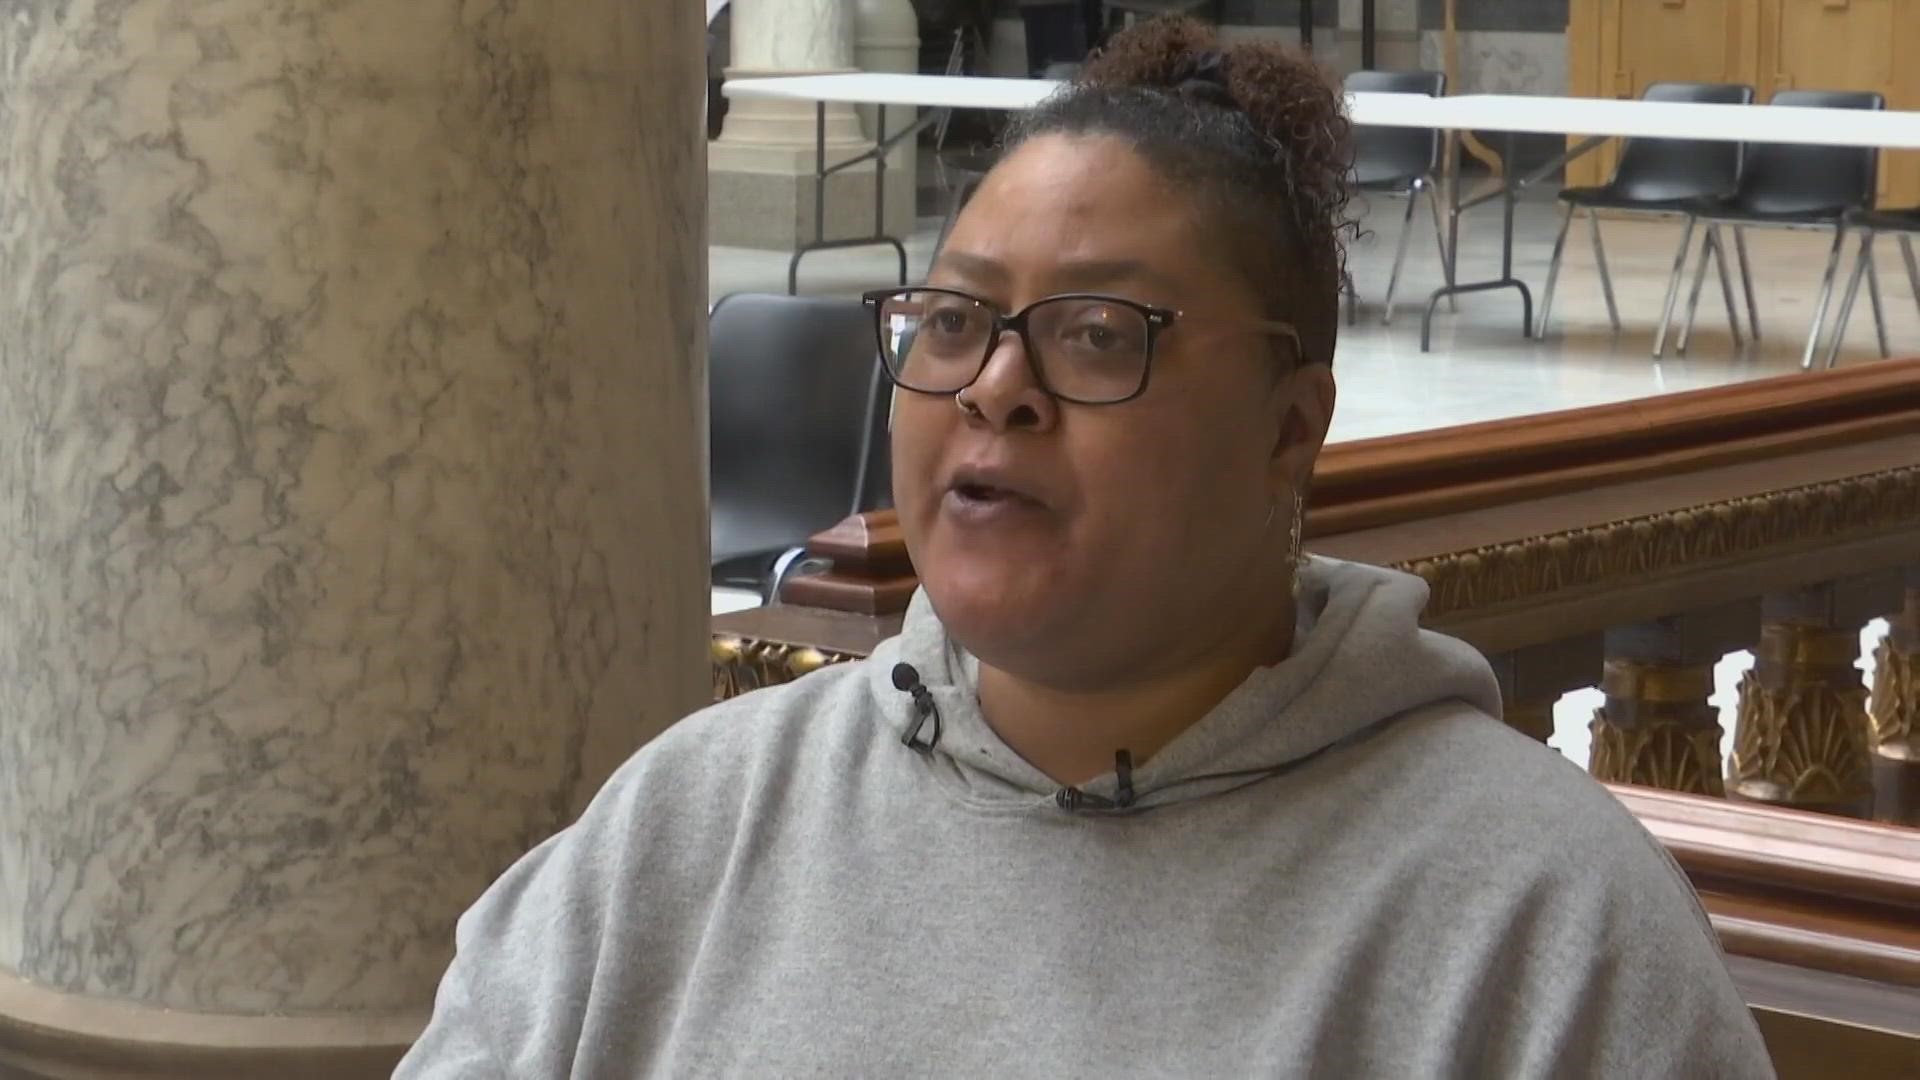 Multiple tenants across central Indiana dealing with horrible living conditions. Now a bill that would protect them has died.